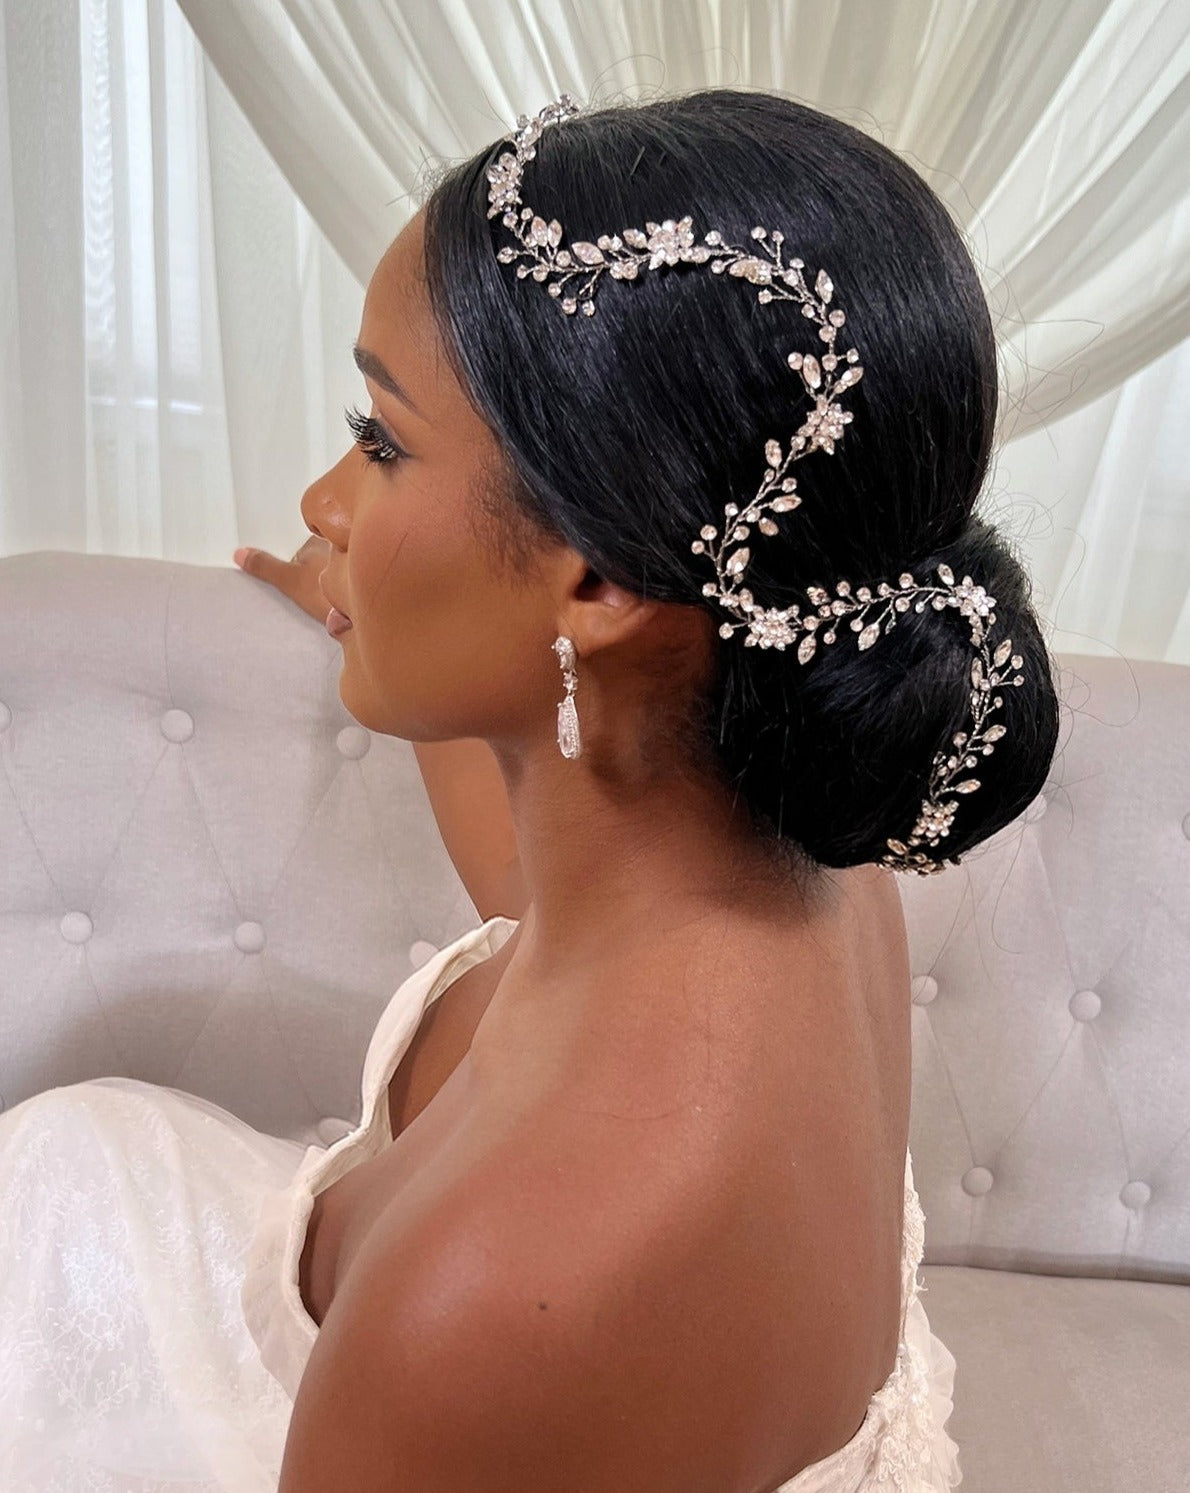 thin silver bridal hair vine with small crystal sprigs and flower details on an updo